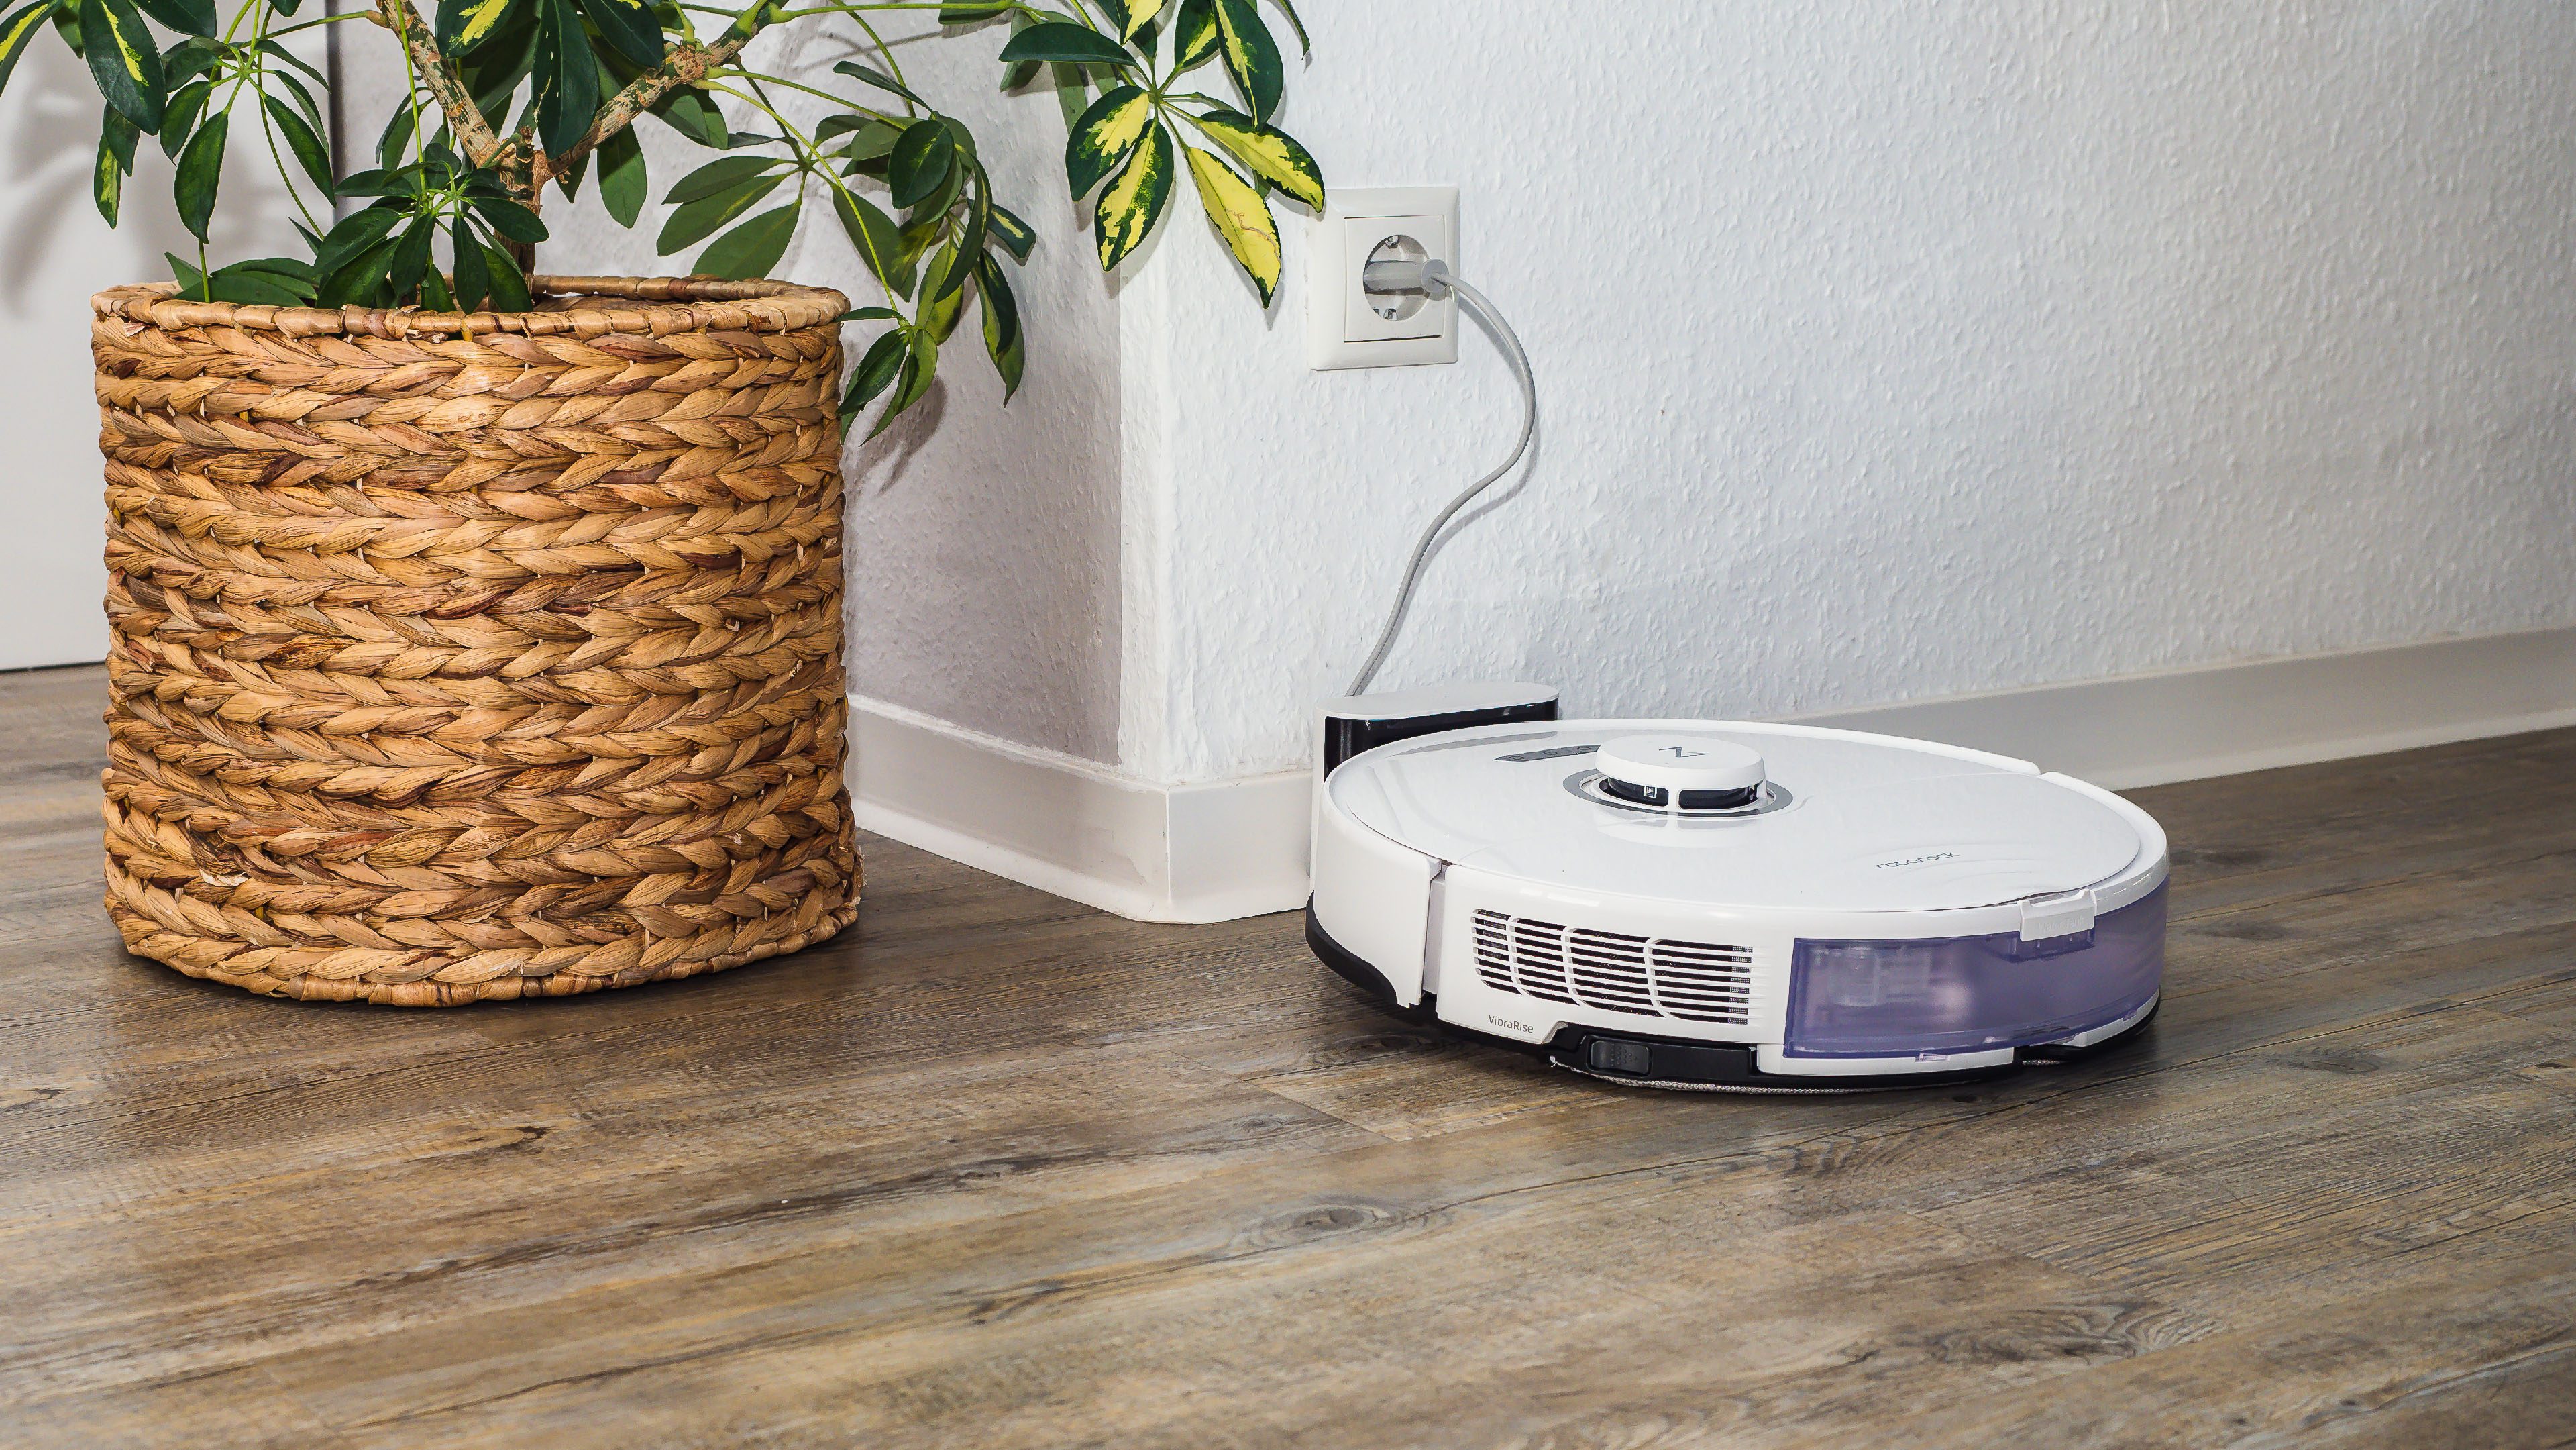 Roborock S8 Review: Inexpensive Robovac Cleans Almost Everything